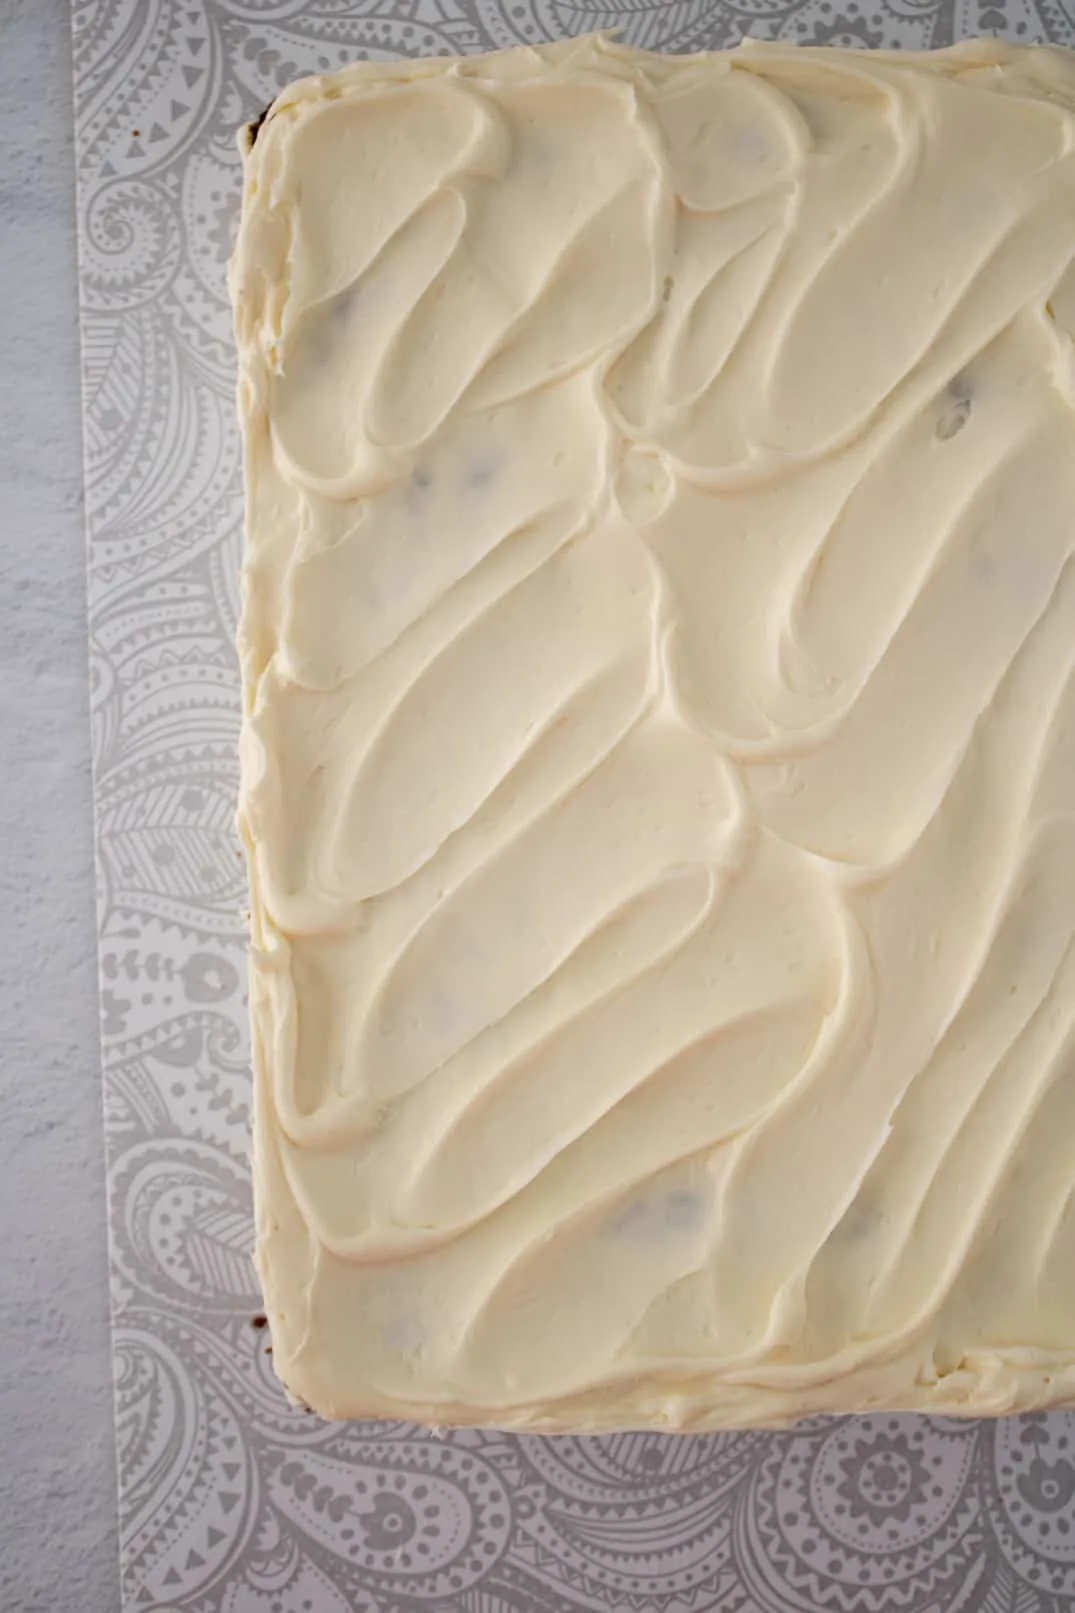 Cream cheese frosting on carrot cake